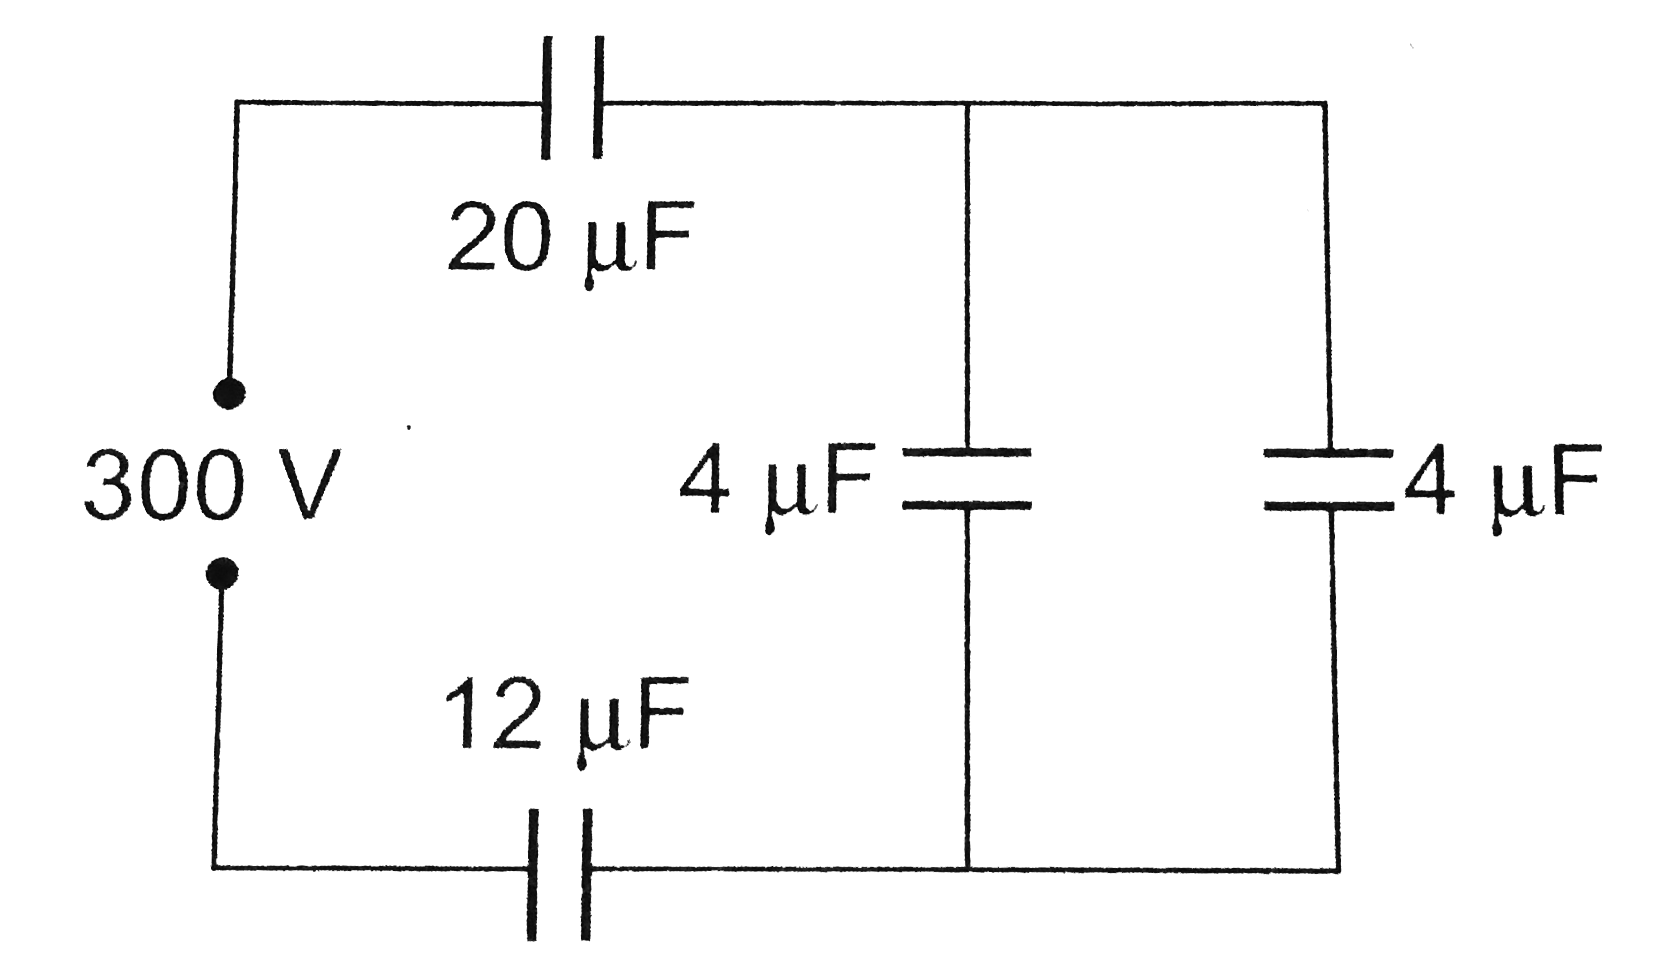 In the adjoining figure, four capacitors are shown with their respective capacities and the P.D. applied. The charge and the P.D. Across the 4muF capacitor will be